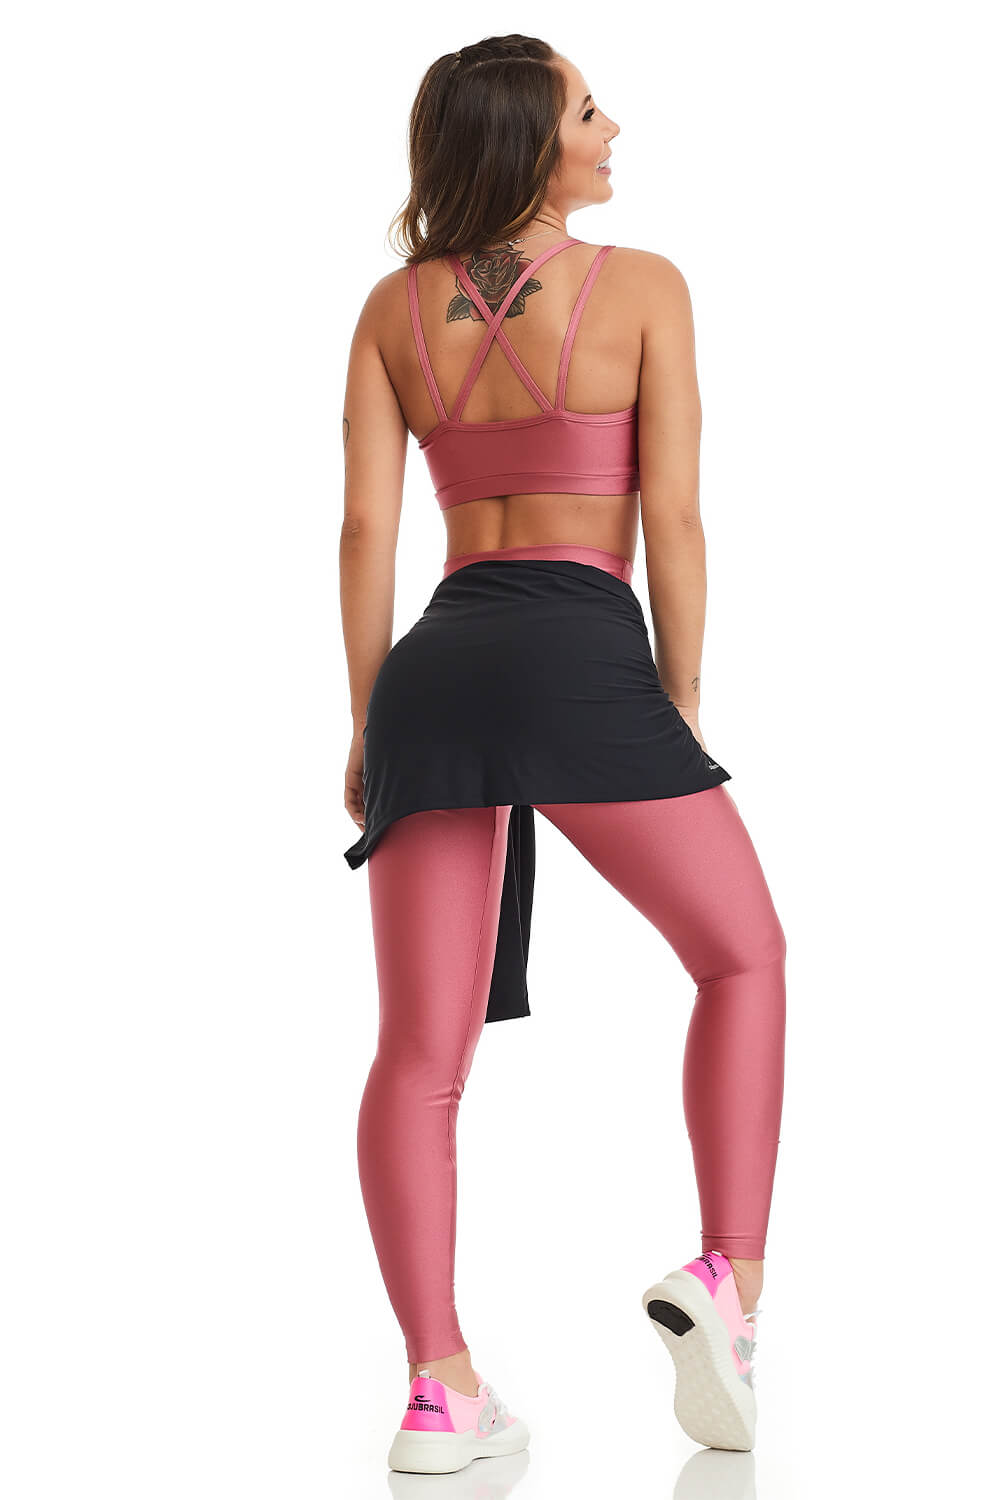 Coverup Magic- Leggings for Working Out